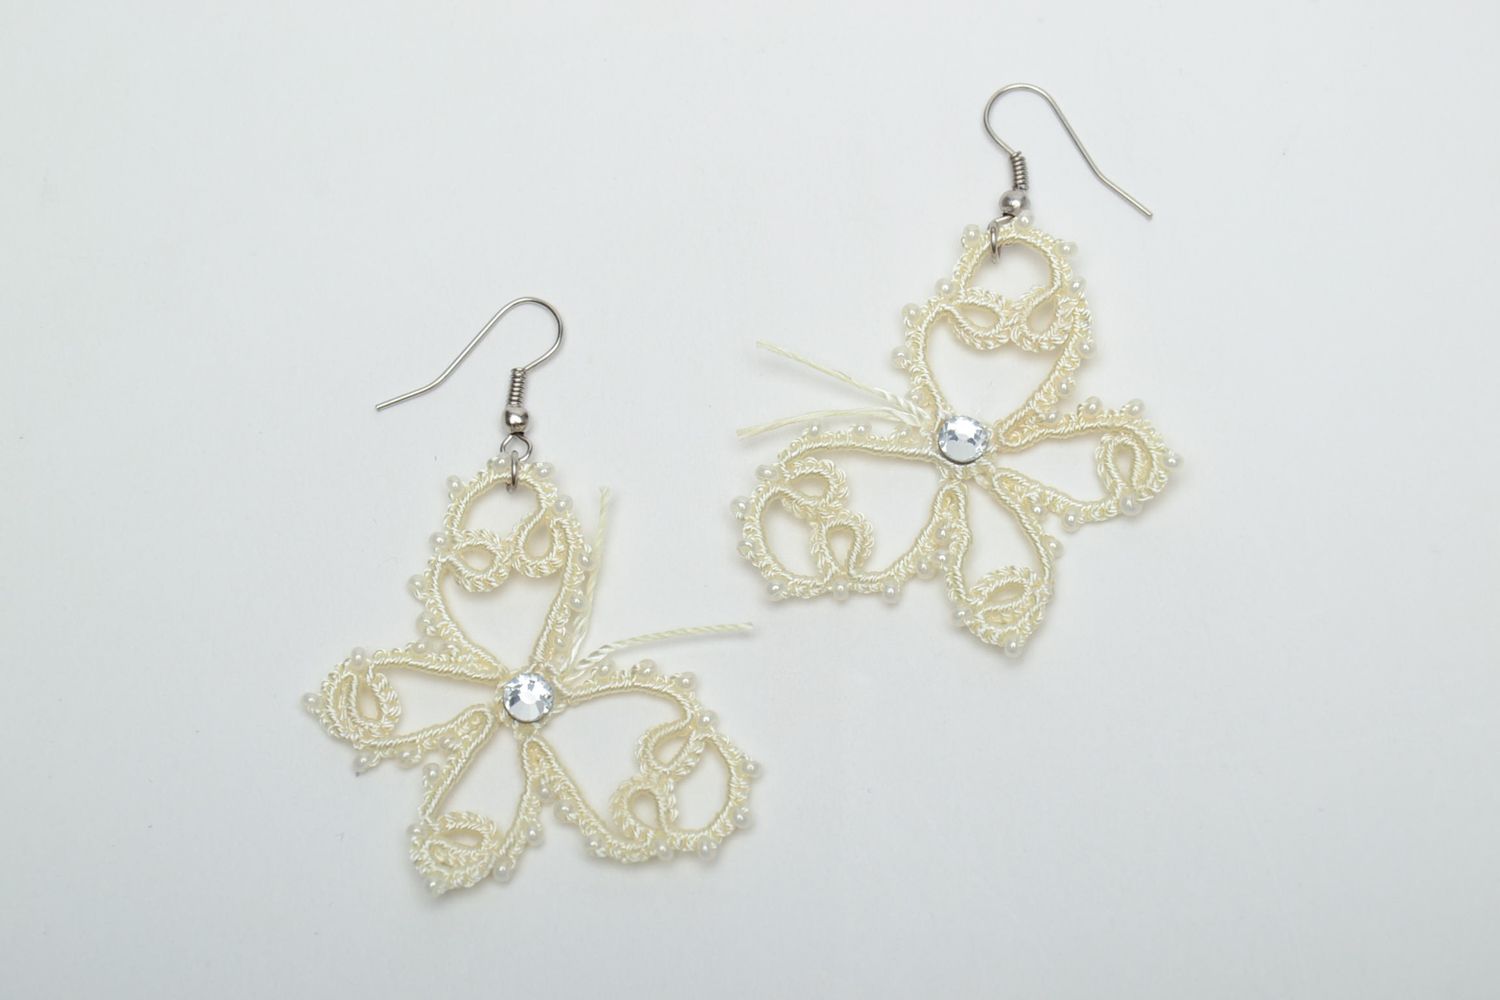 Lace earrings with beads made using tatting technique photo 2